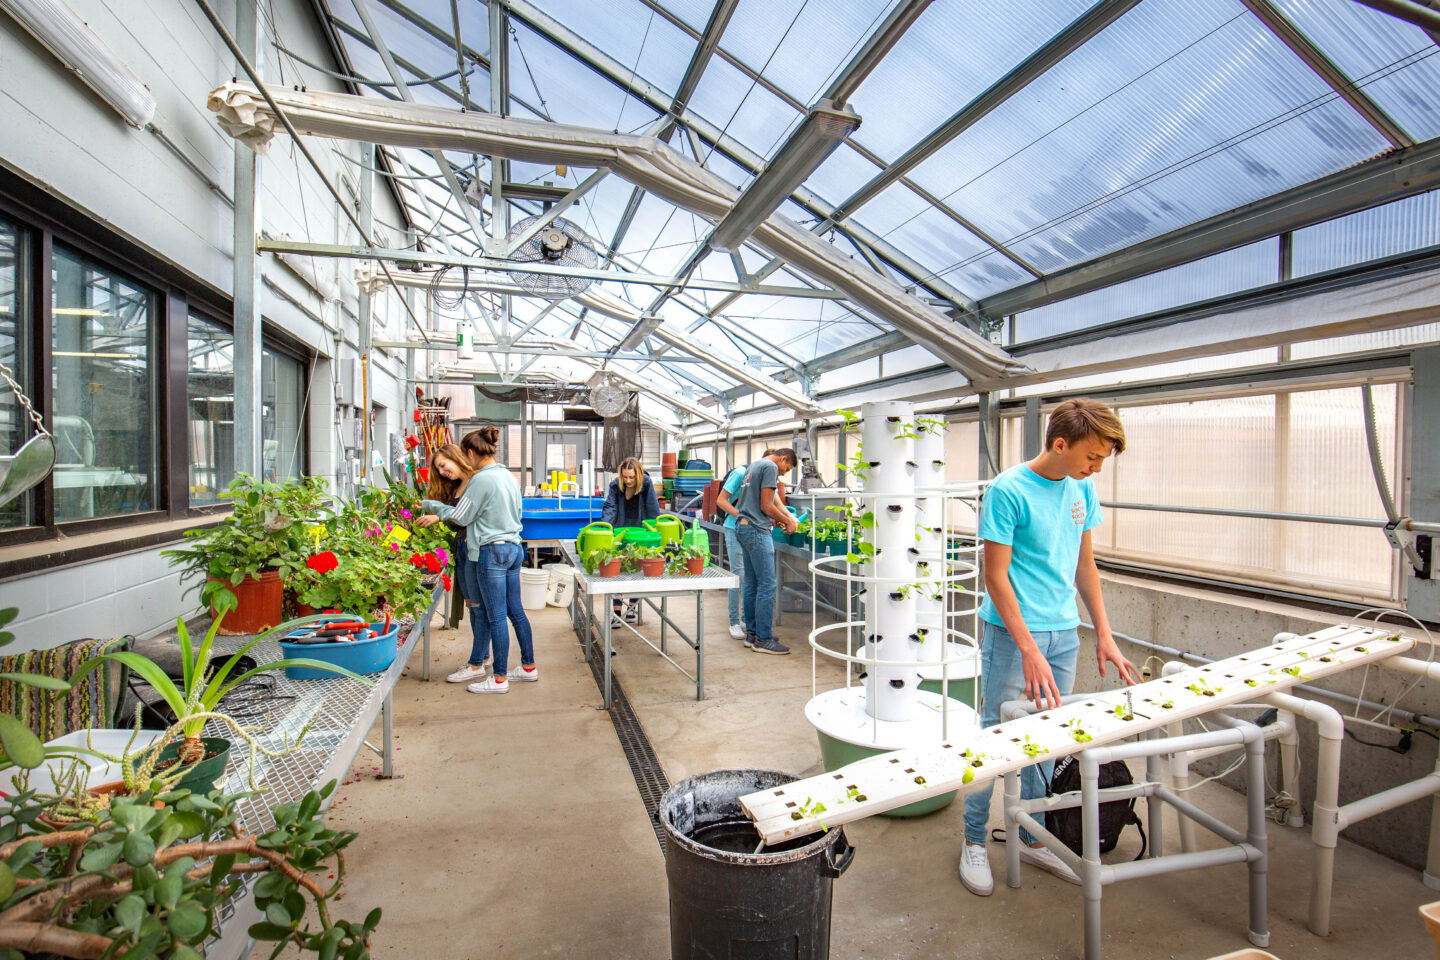 Students tend to plants in the school greenhouse